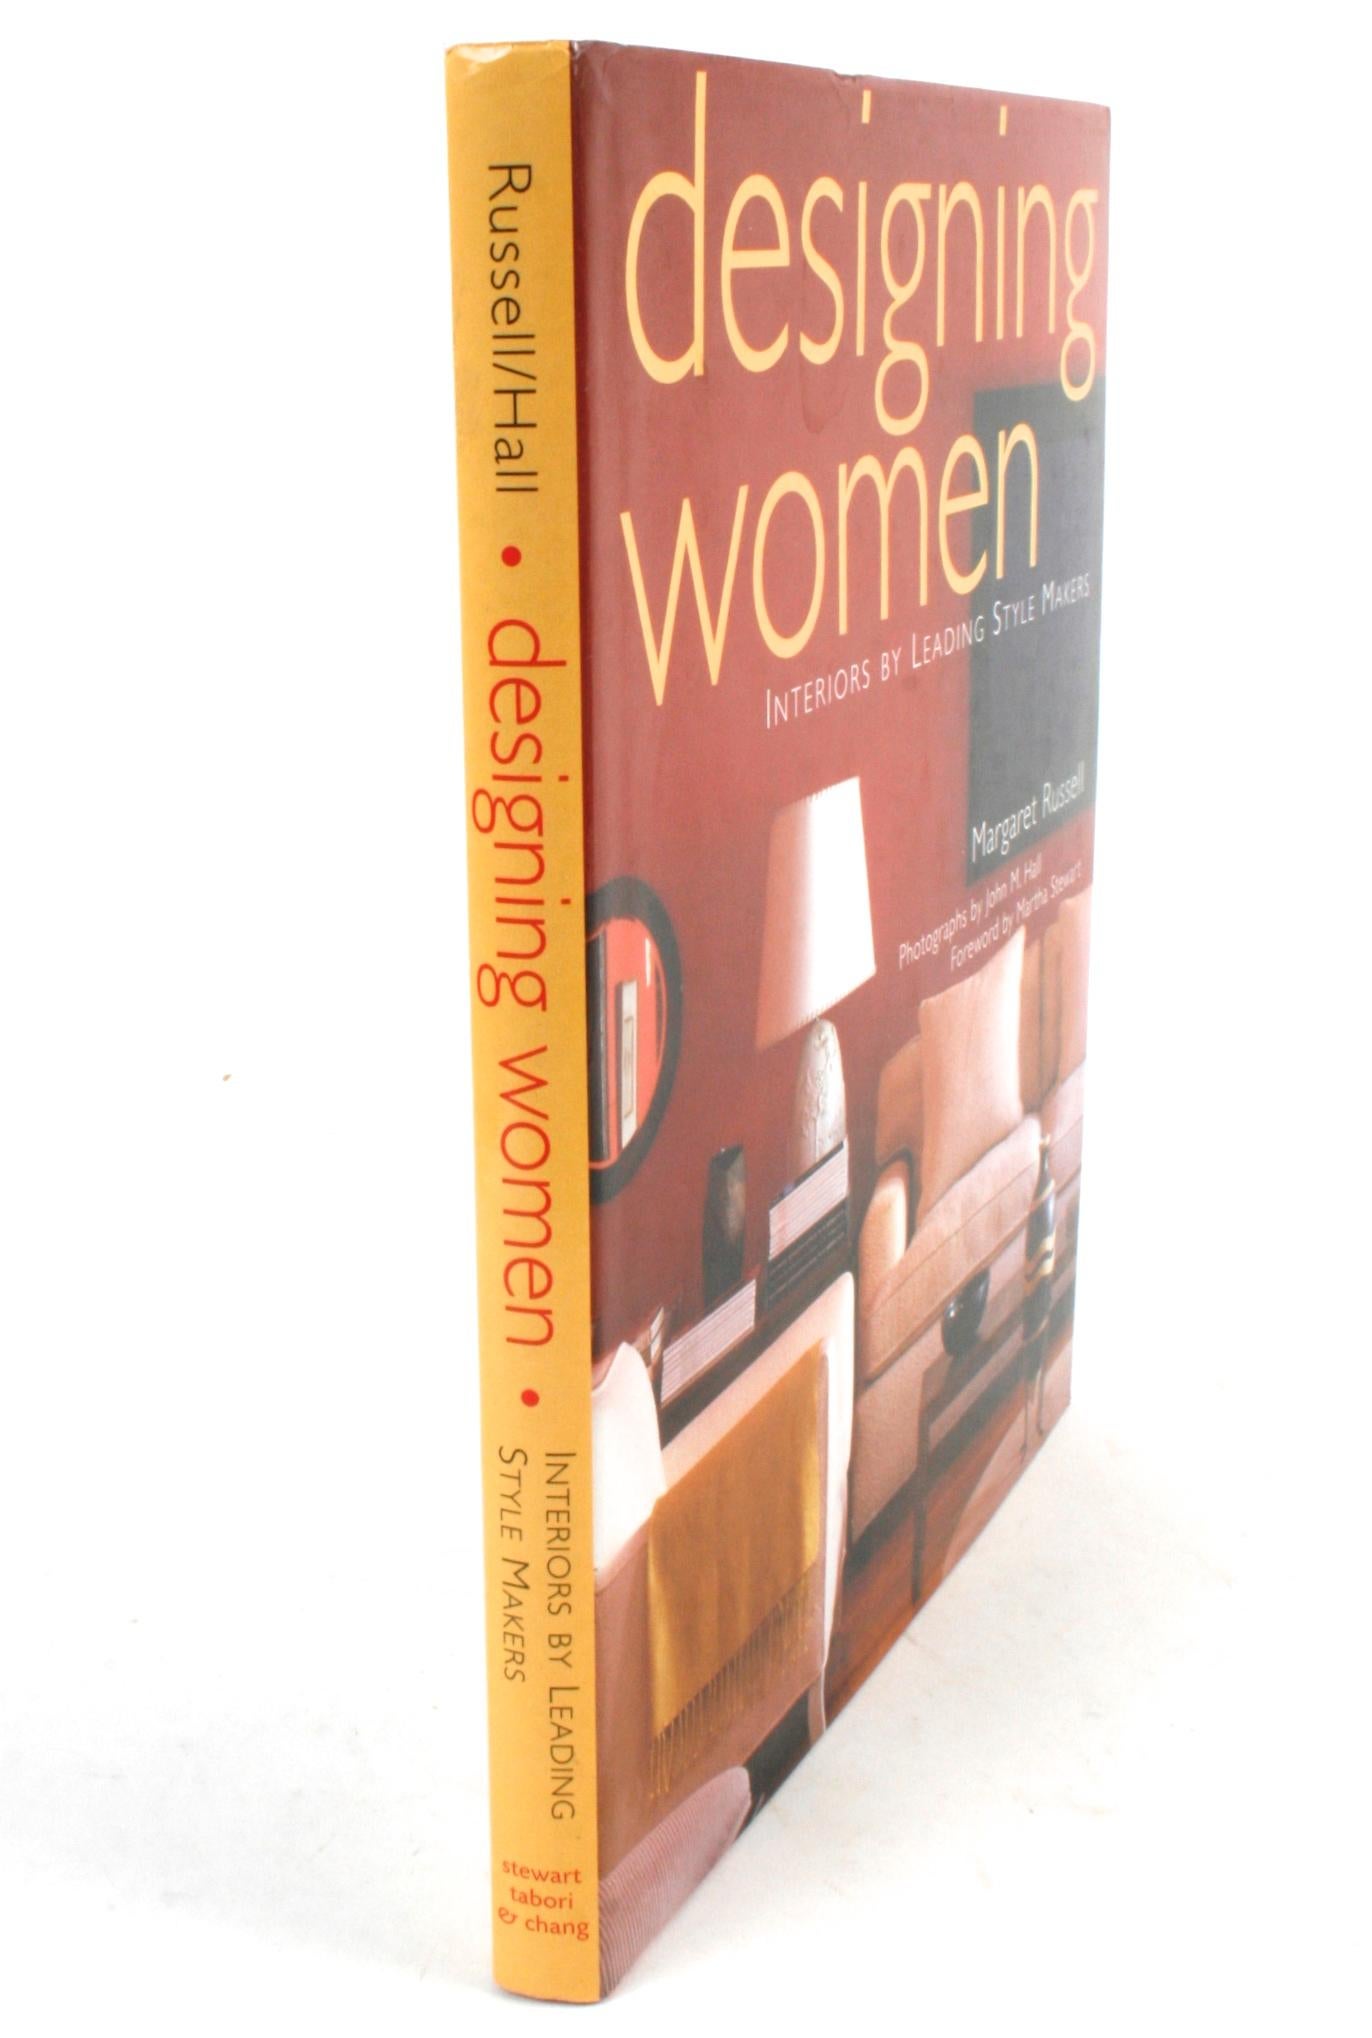 Designing Women, Interiors, Leading Style Makers, Margaret Russell, 1st Edition 13